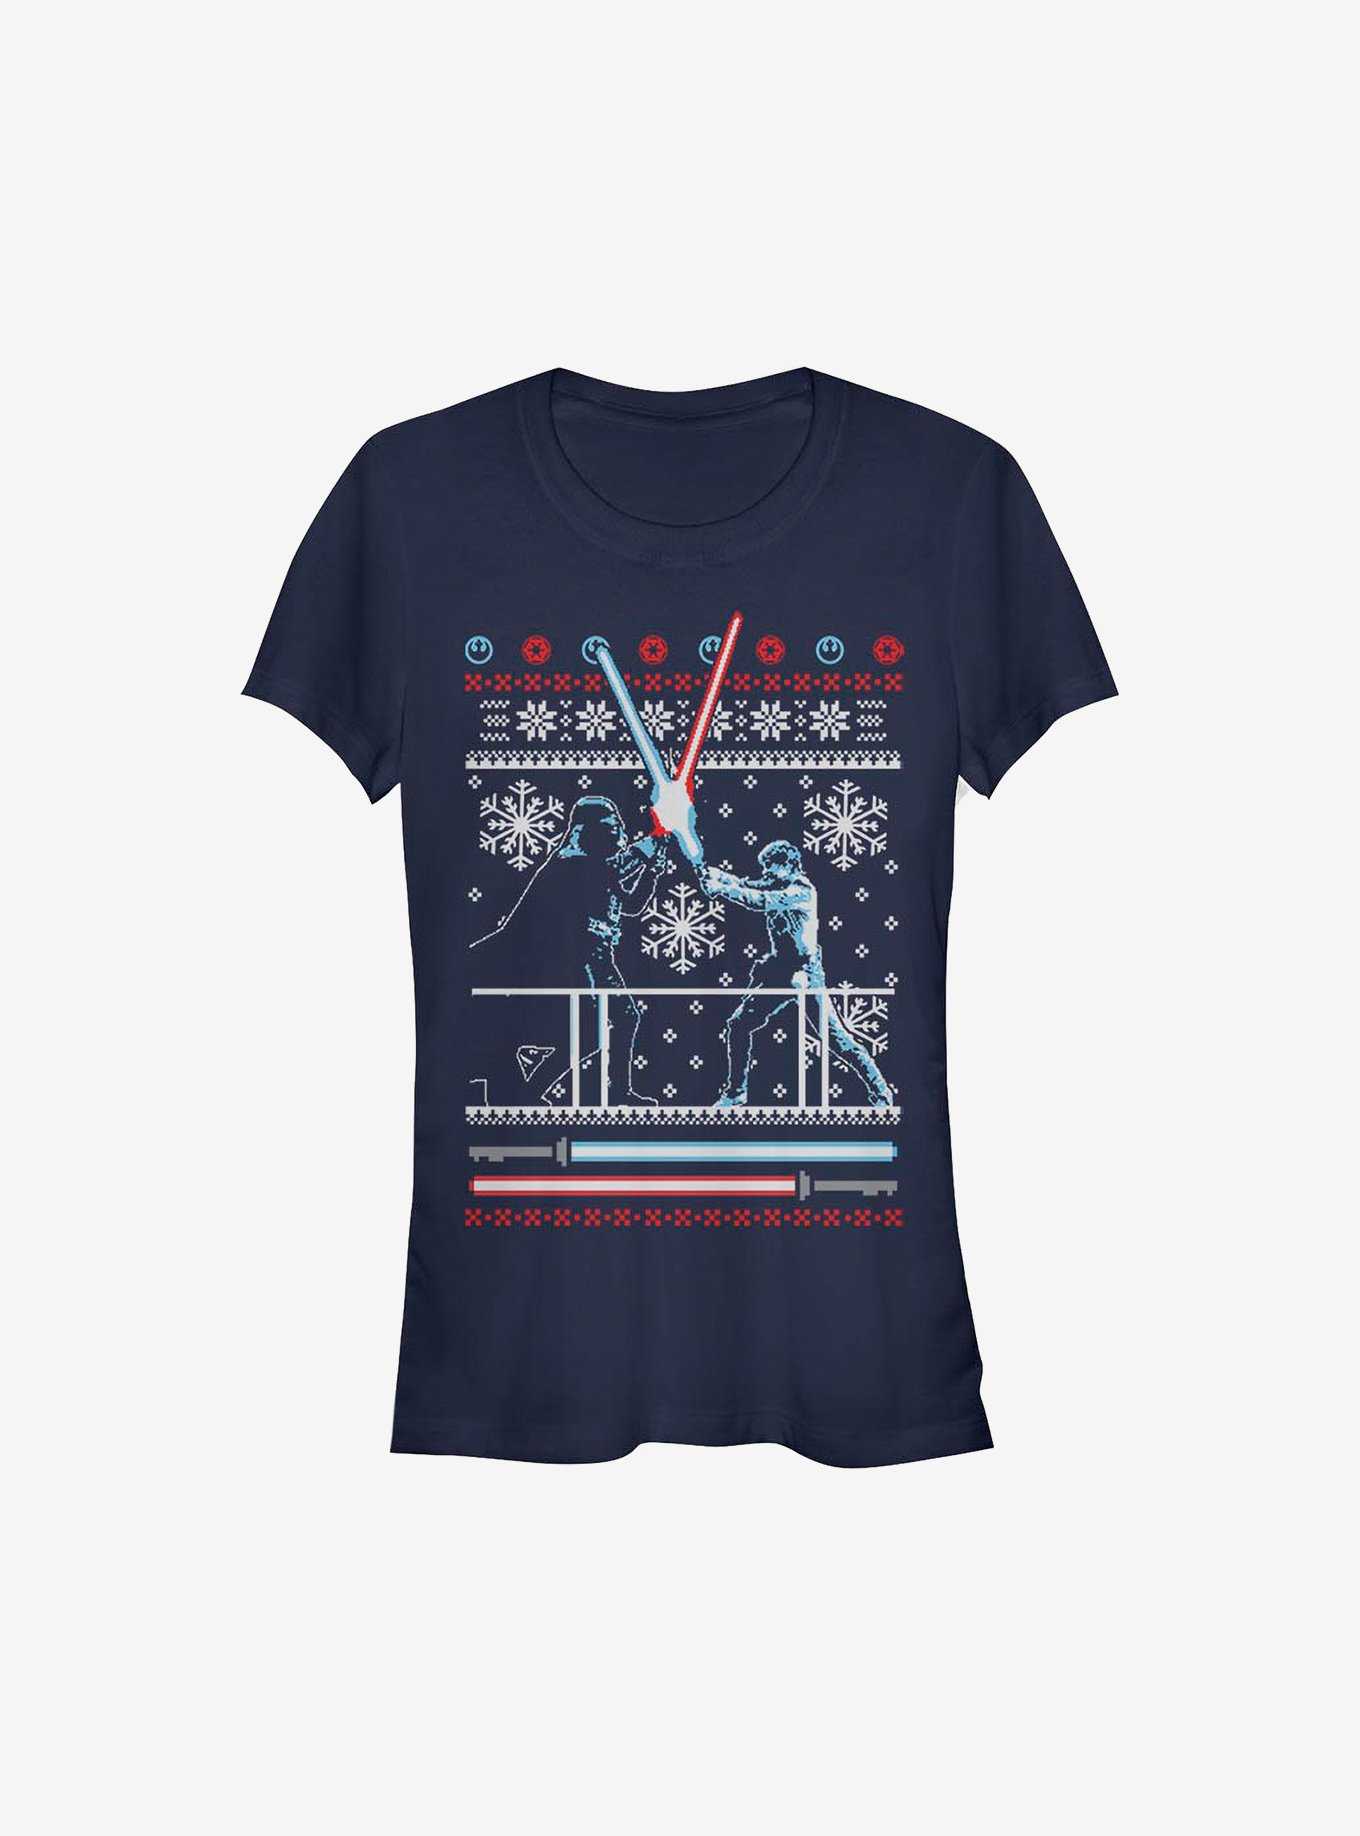 Star Wars Fued Ugly Christmas Sweater Girls T-Shirt, , hi-res